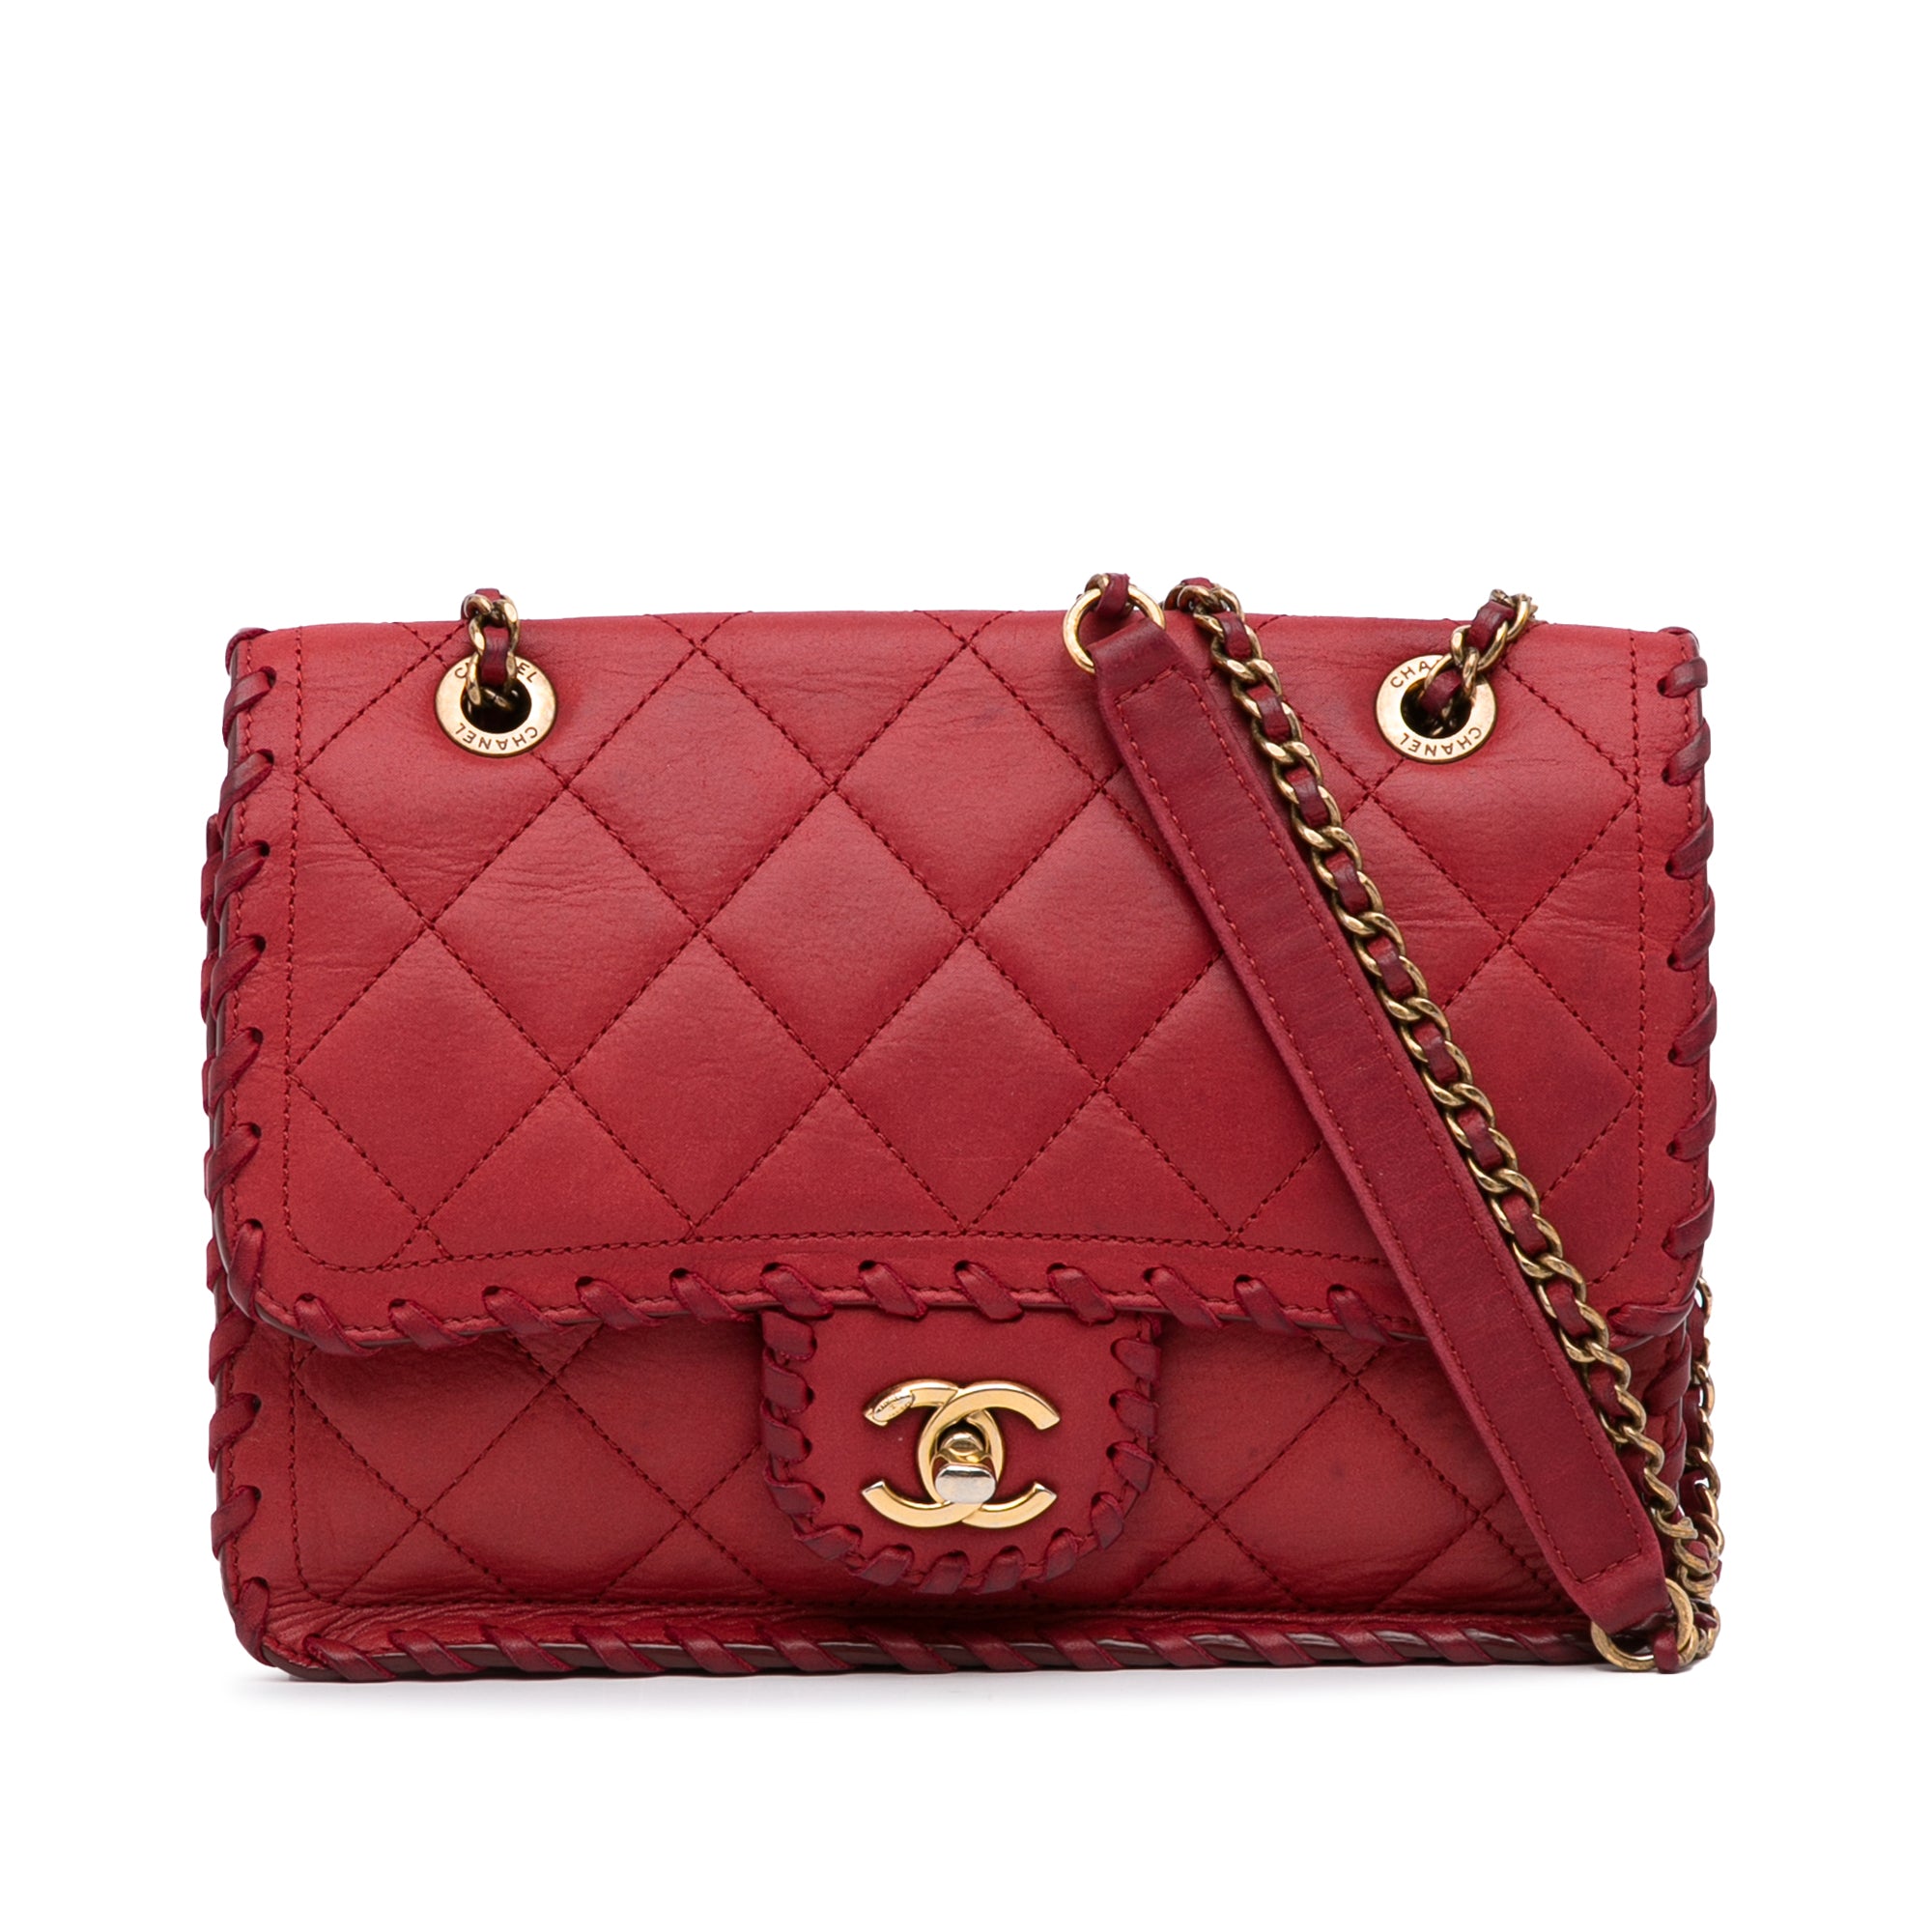 Chanel Pre-owned Cc-Stitch Leather Bucket Bag - Red